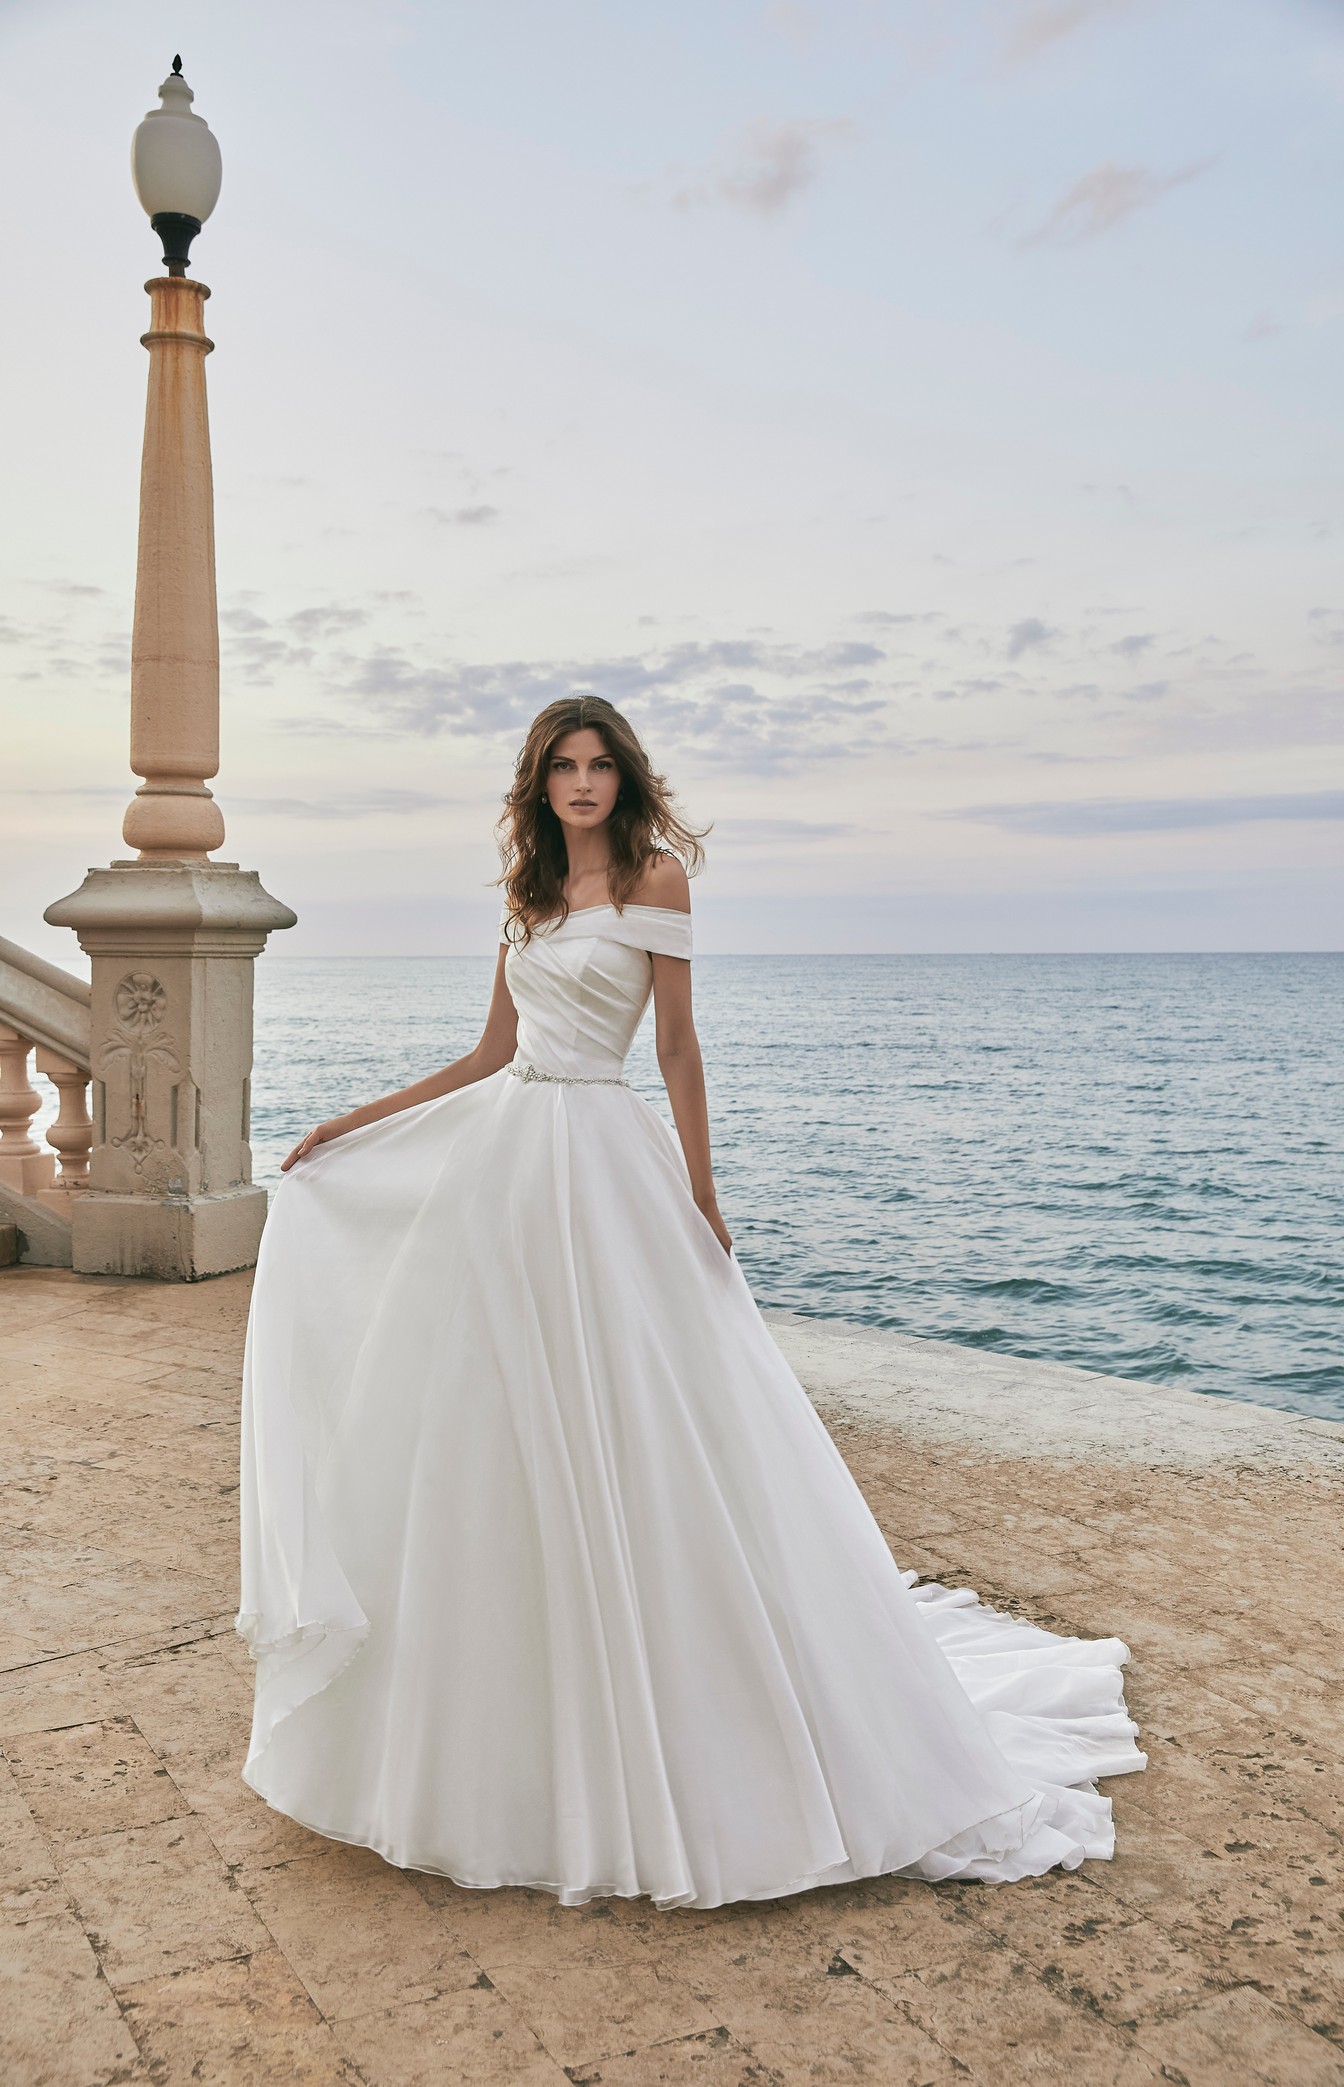 Brunette model stood near a light post by the sea in Victoria Jane 18619, a ballgown wedding dress with a bateau off-the-shoulder neckline and a delicate sparkly diamante belt